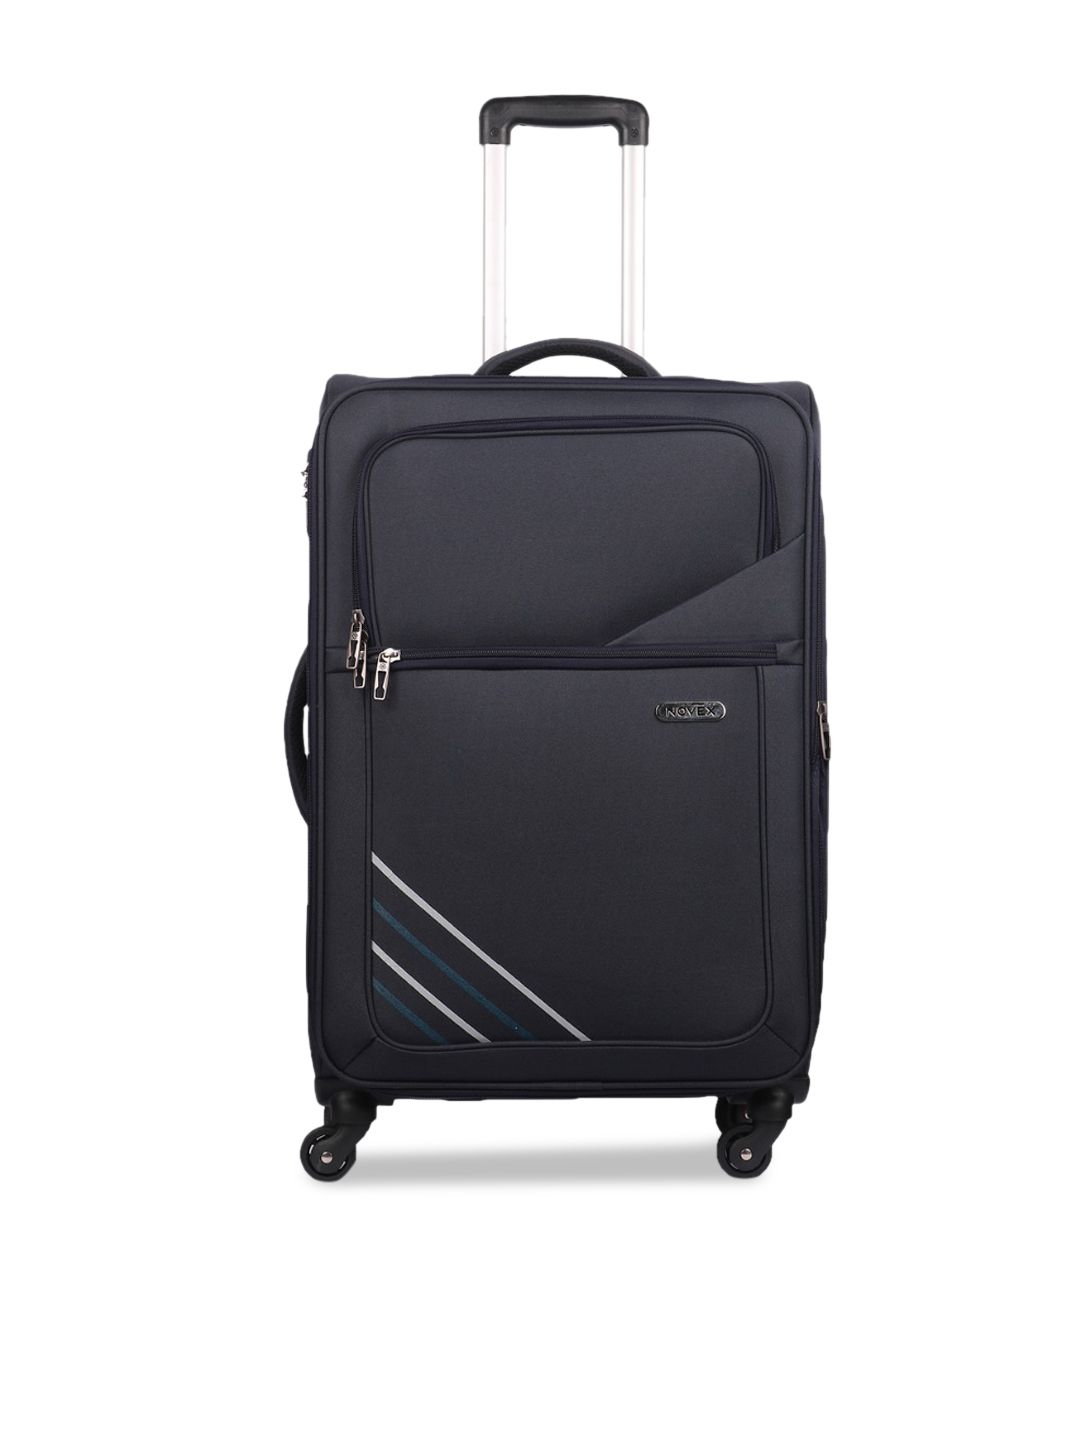 NOVEX Blue Solid Soft-Sided Trolley Suitcase Price in India